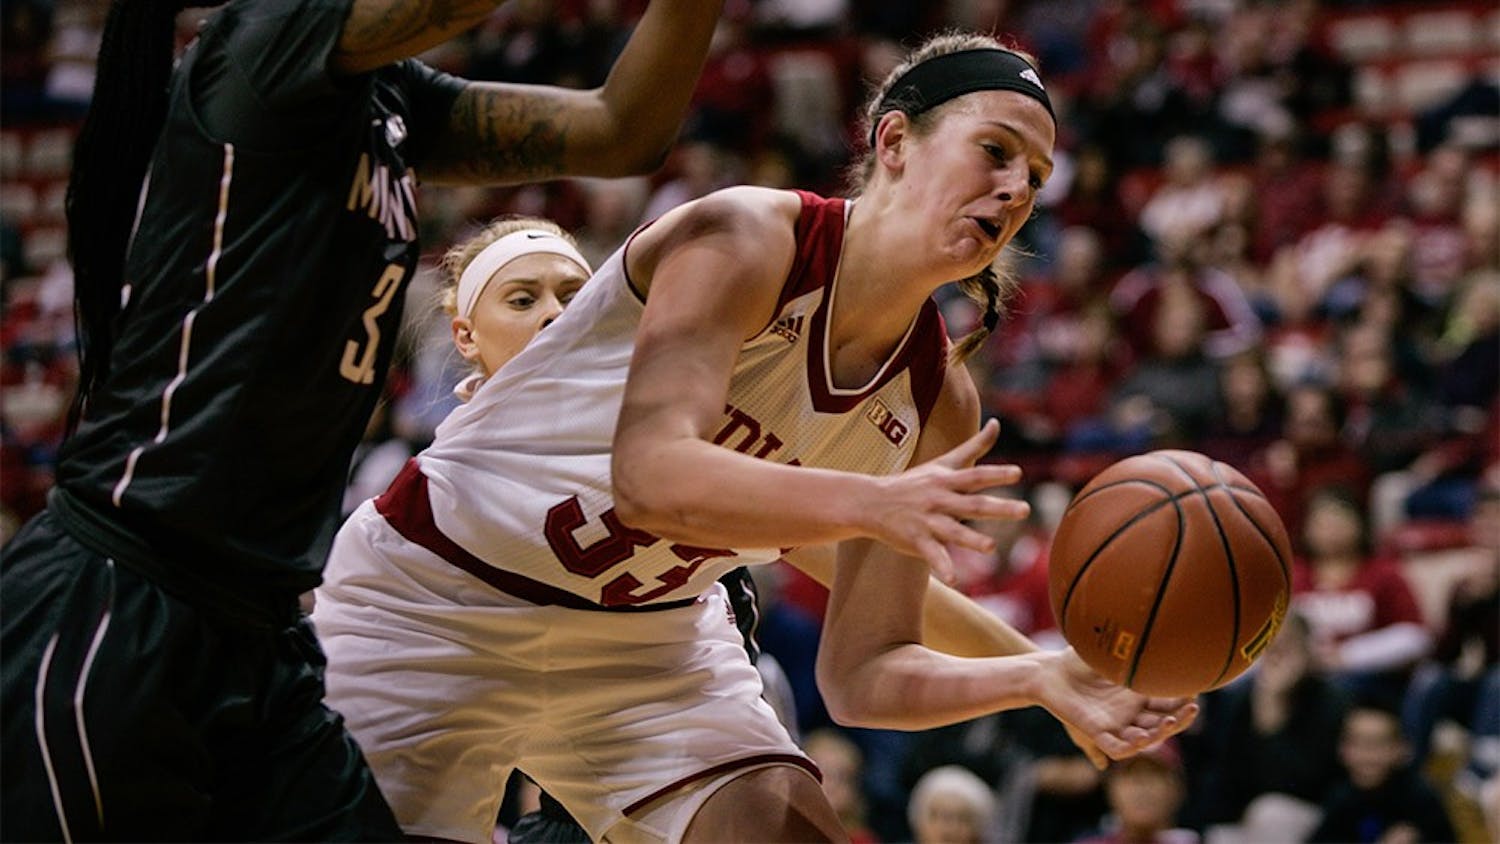 Sophomore forward Amanda Cahill reaches for the ball before it goes out of bounds. IU defeated Minnesota 93-79 Feb. 18.